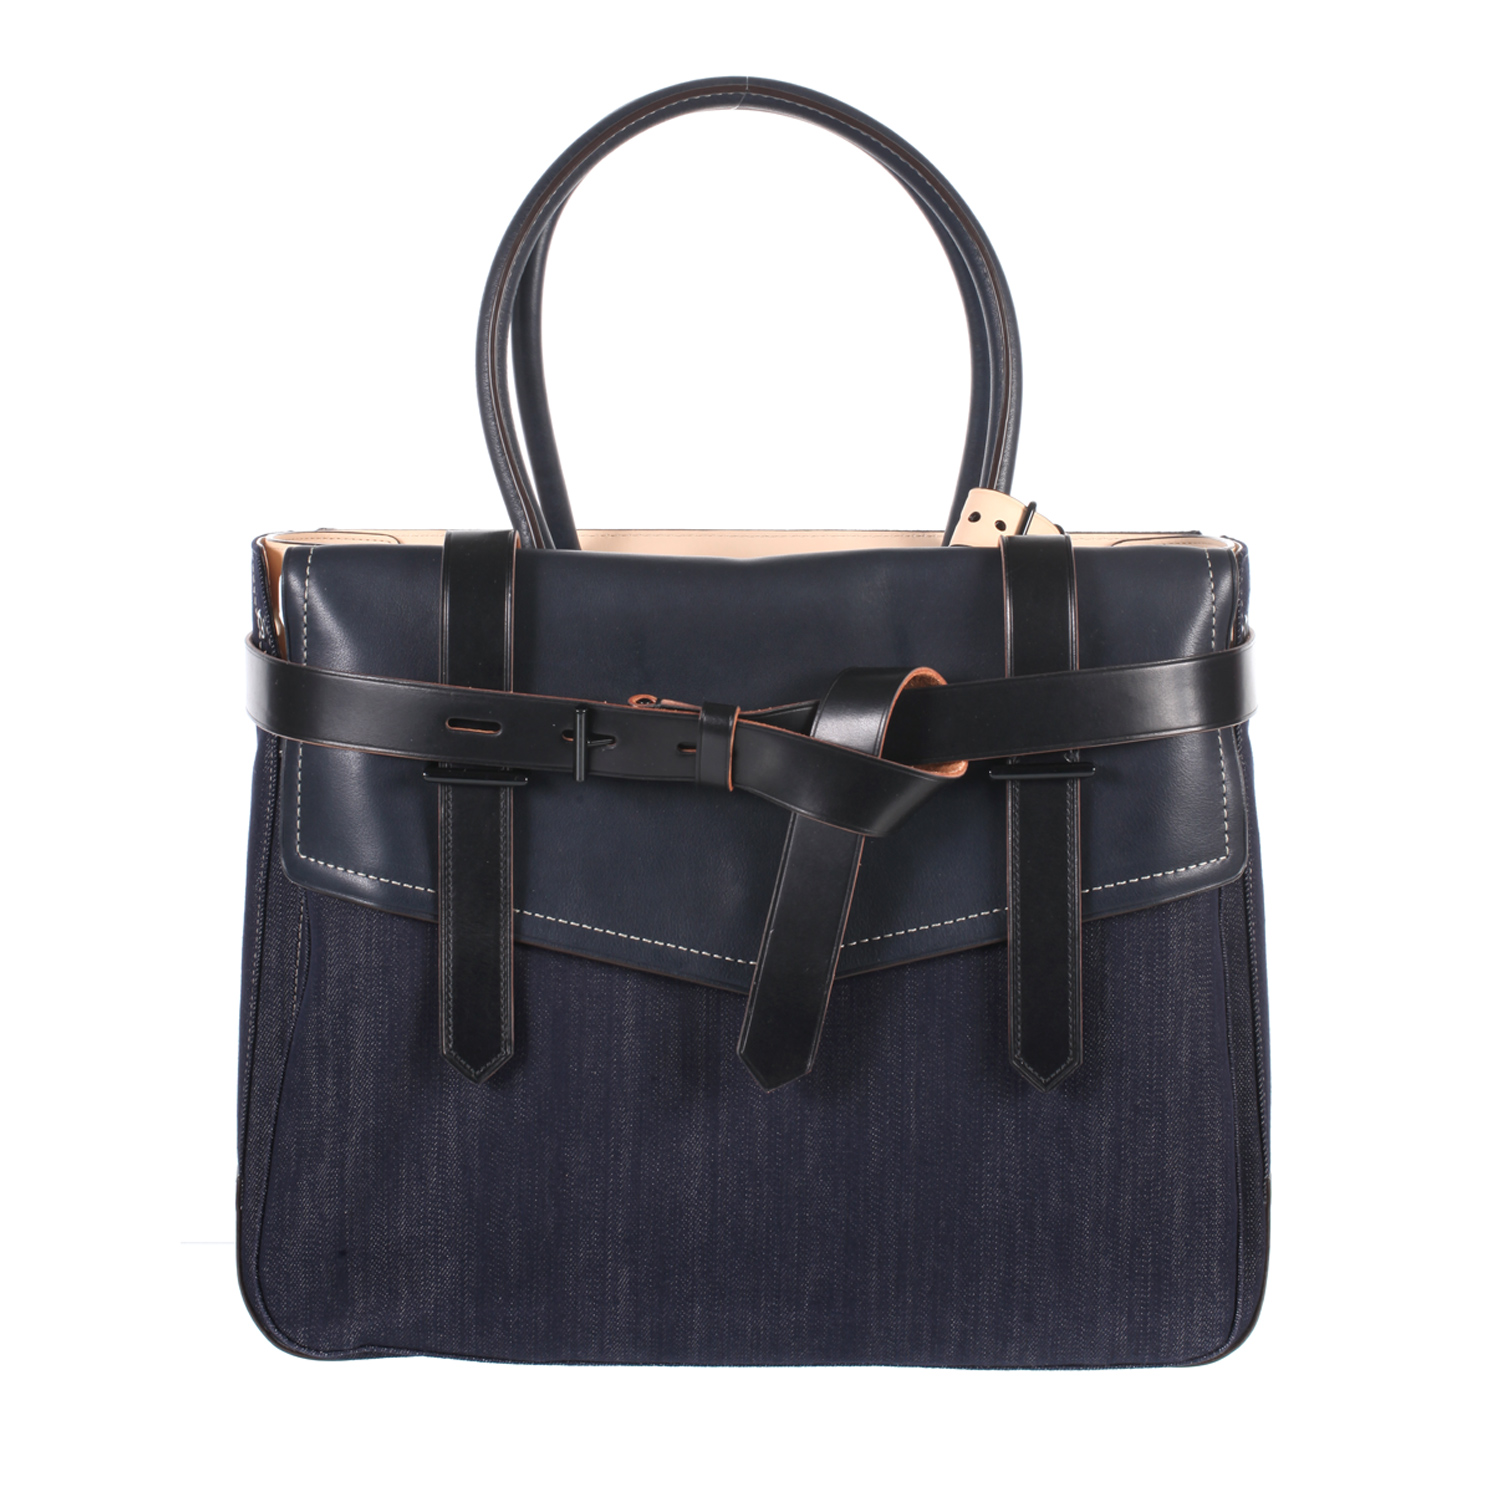 Reed Krakoff « Boxer » Bag in Raw Denim As Well As Navy and Black ...